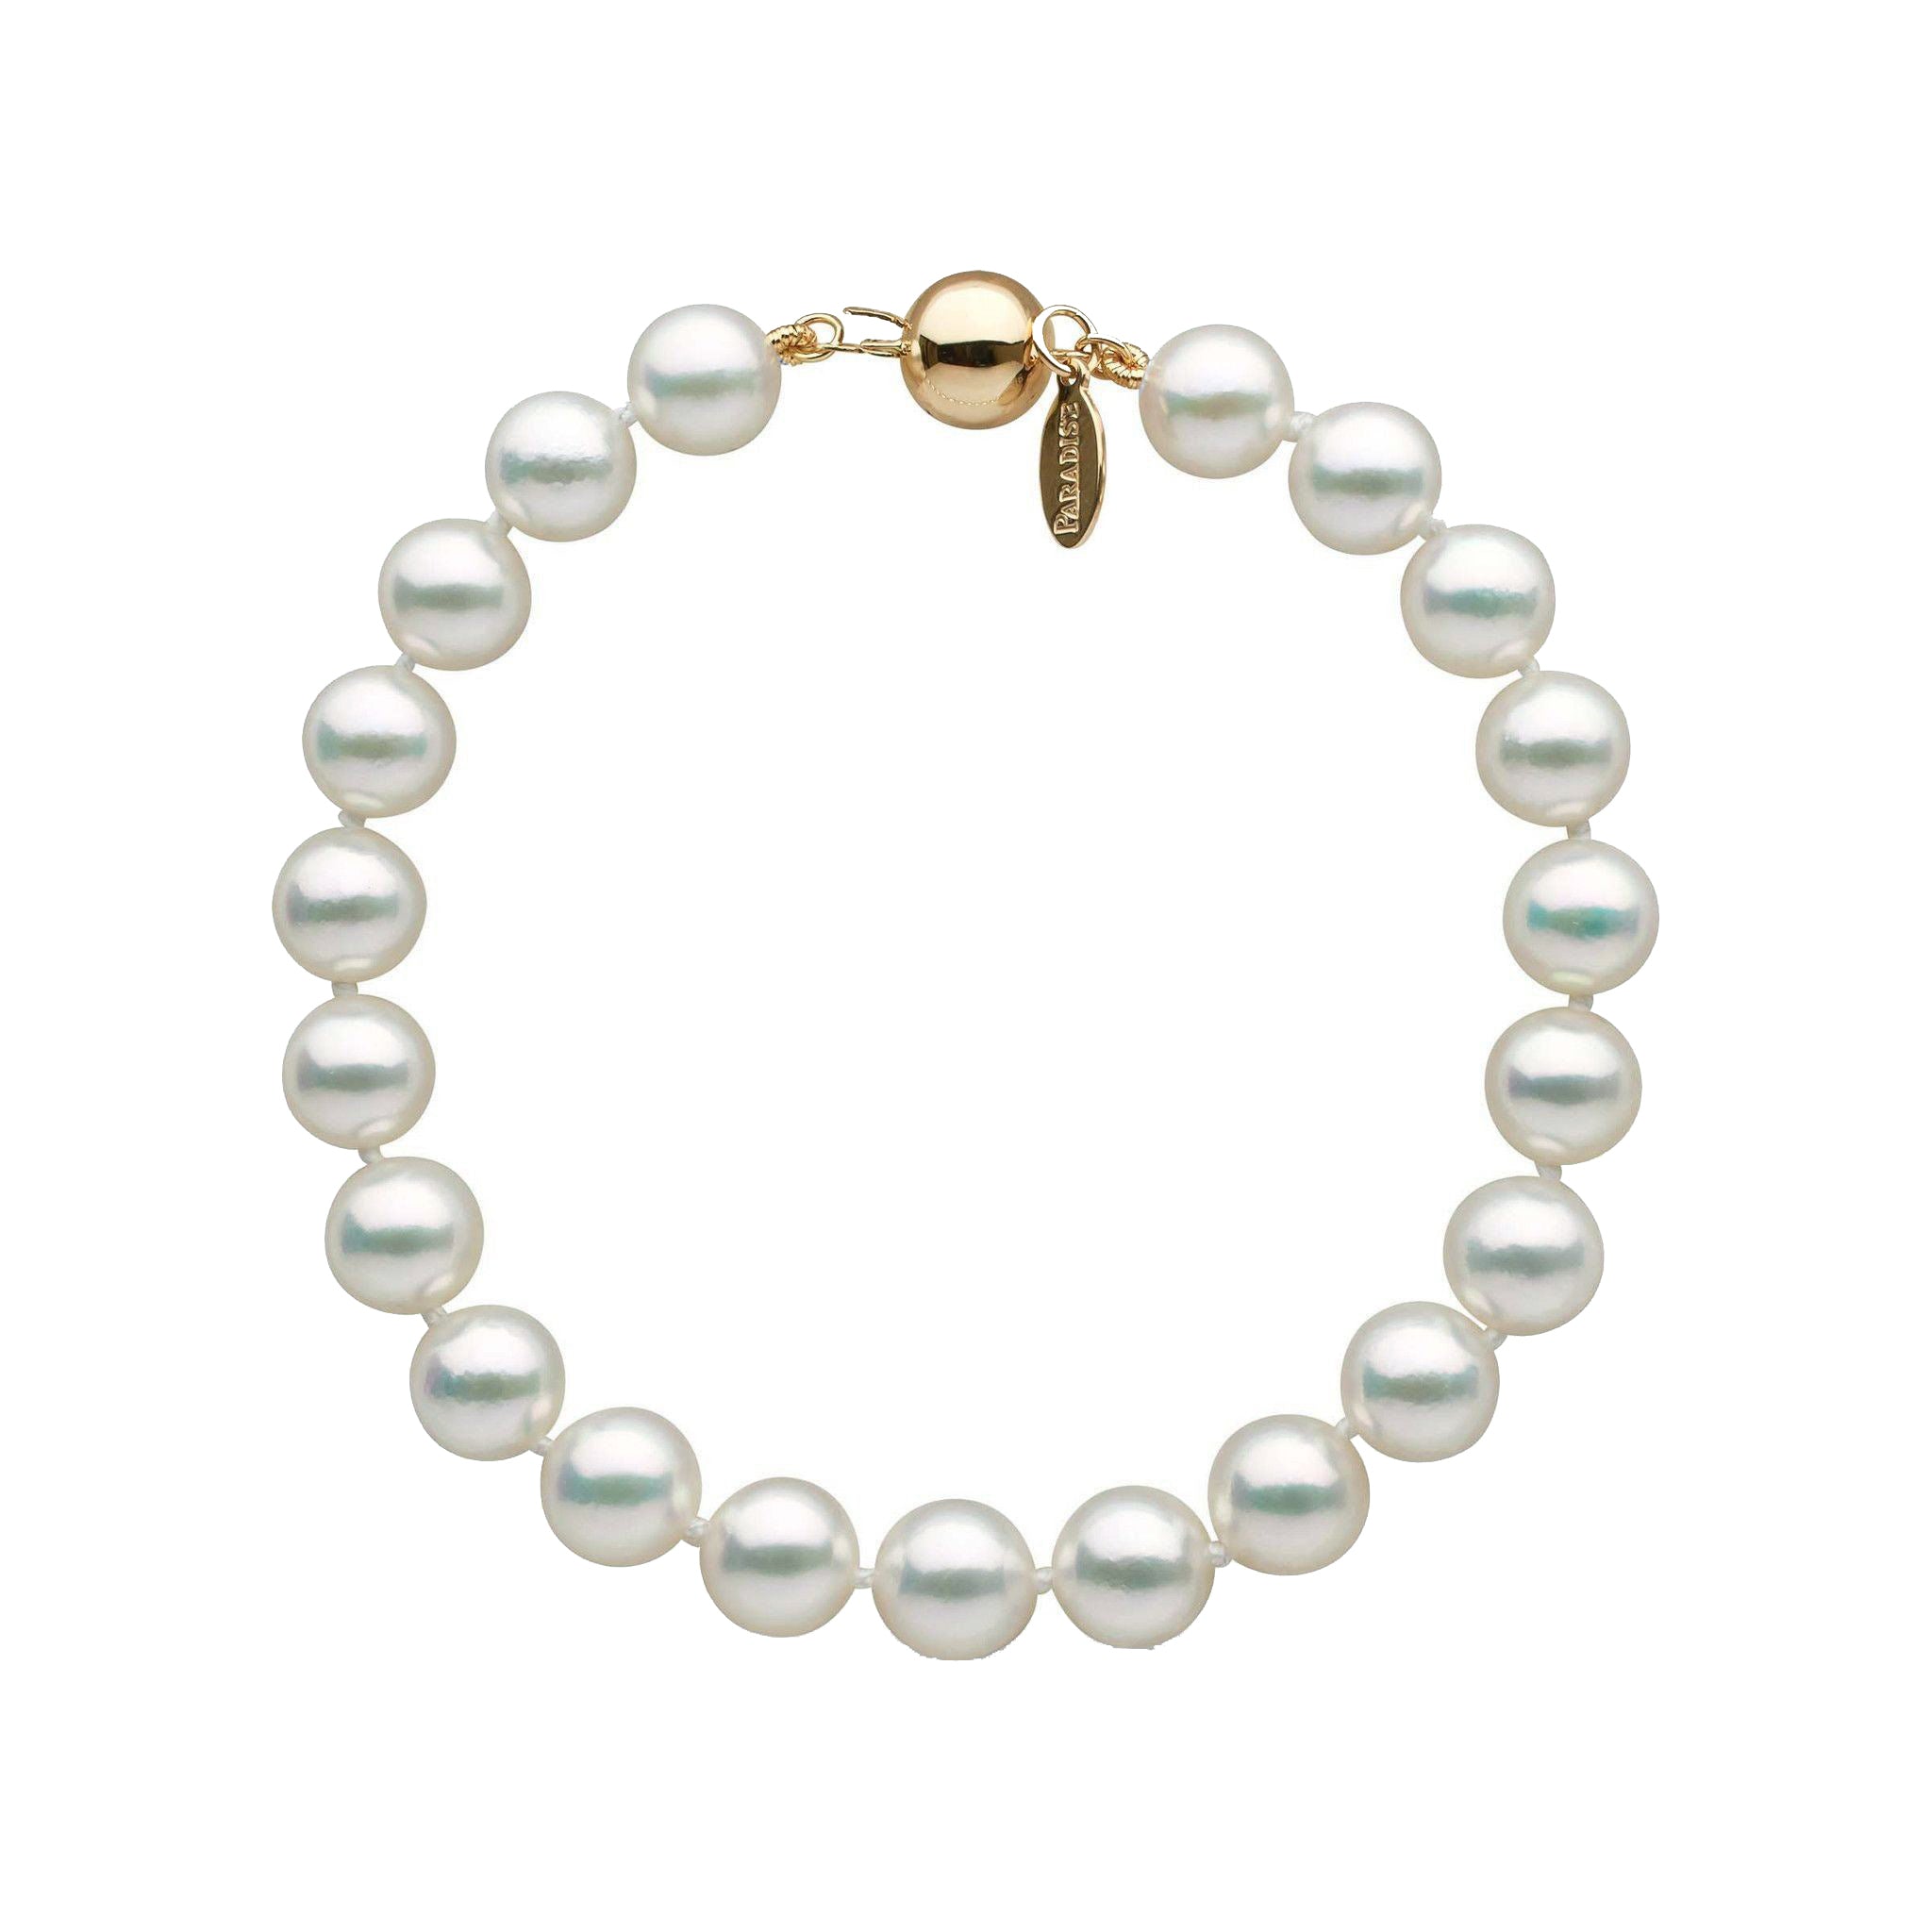 7.5-8.0 mm Natural White Hanadama Akoya Pearl Bracelet yellow gold with Pearl Paradise tag